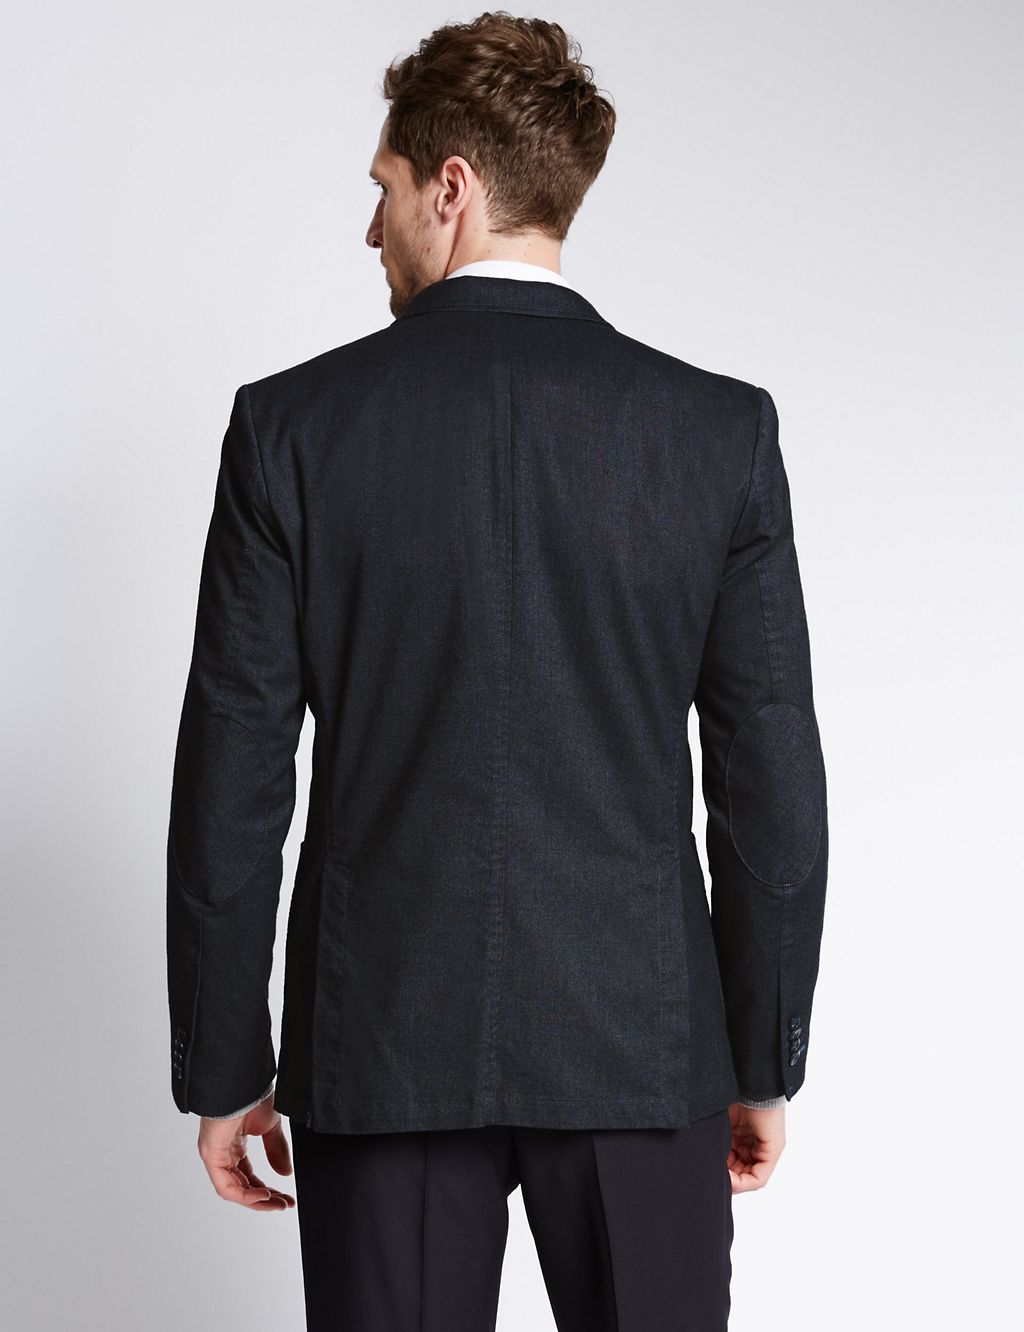 Tailored Fit 2 Button Jacket 2 of 8